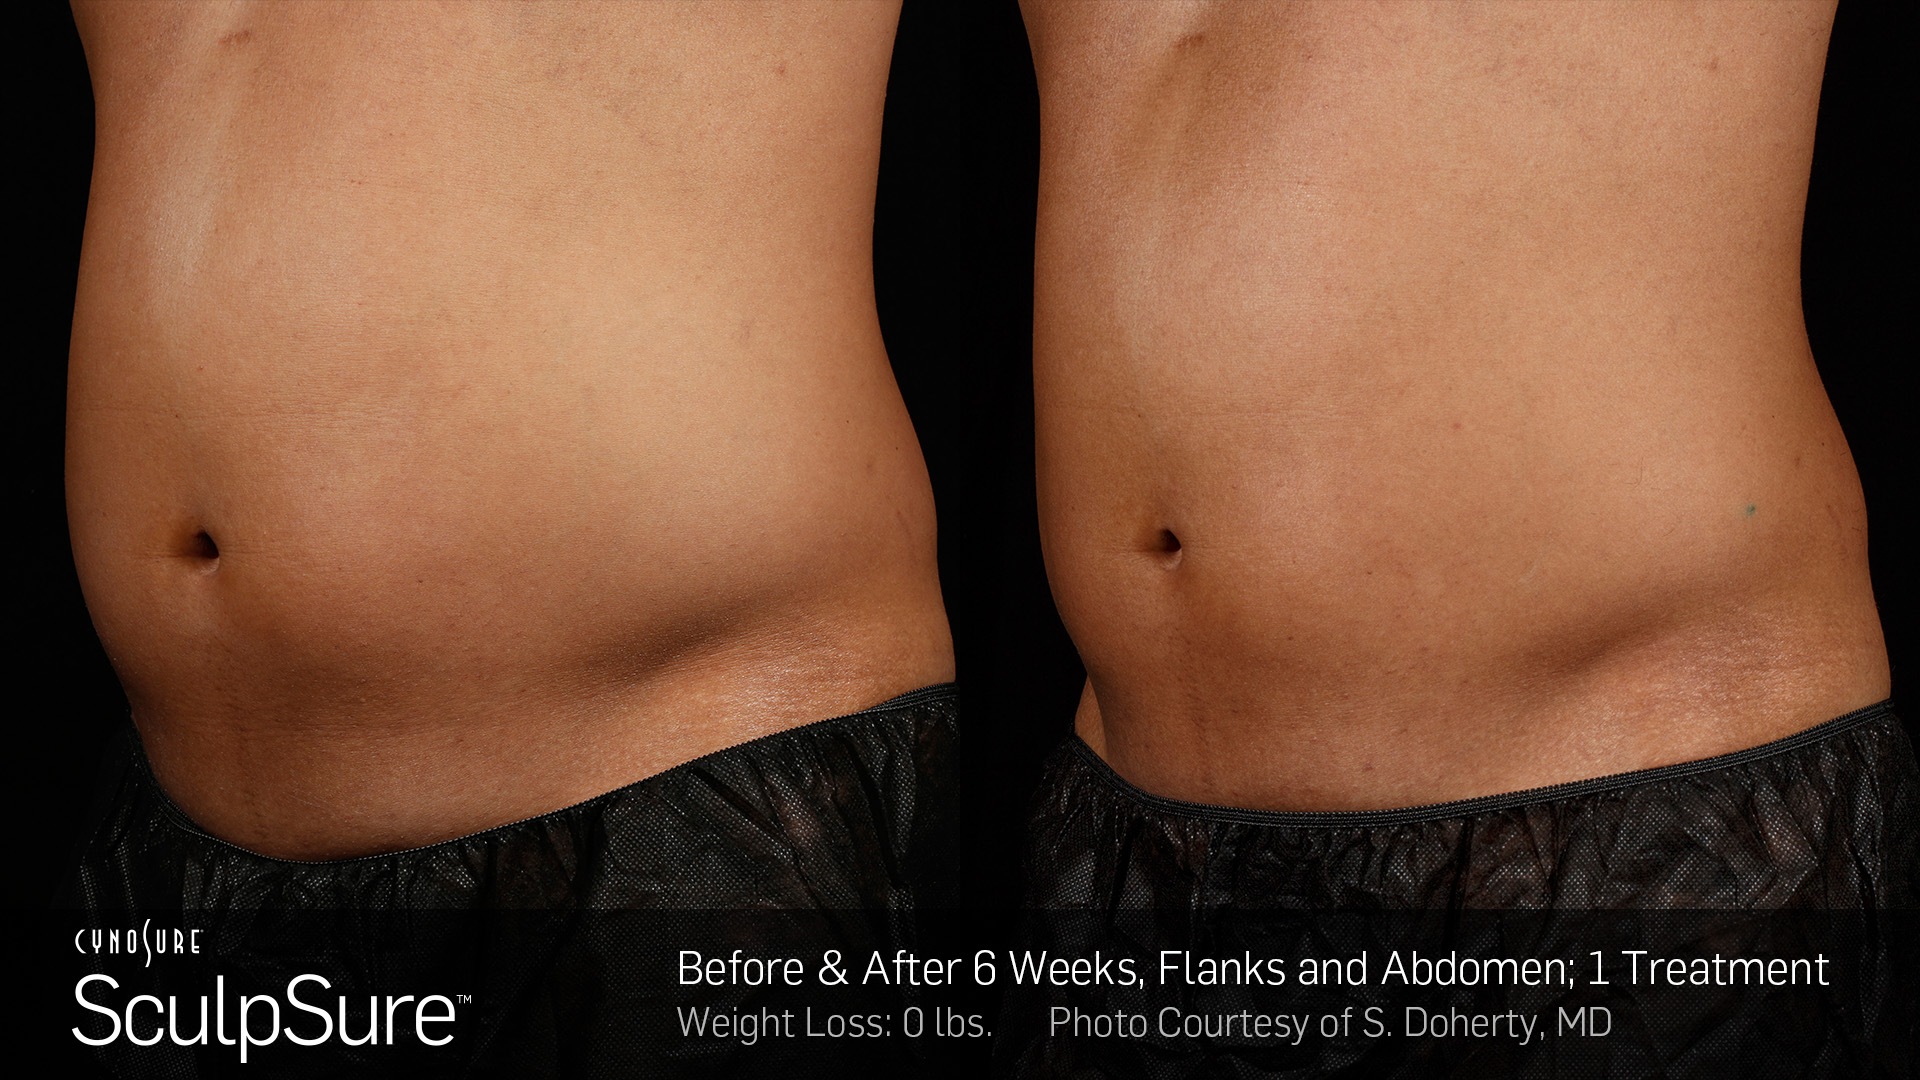 SculpSure treatment before and after.